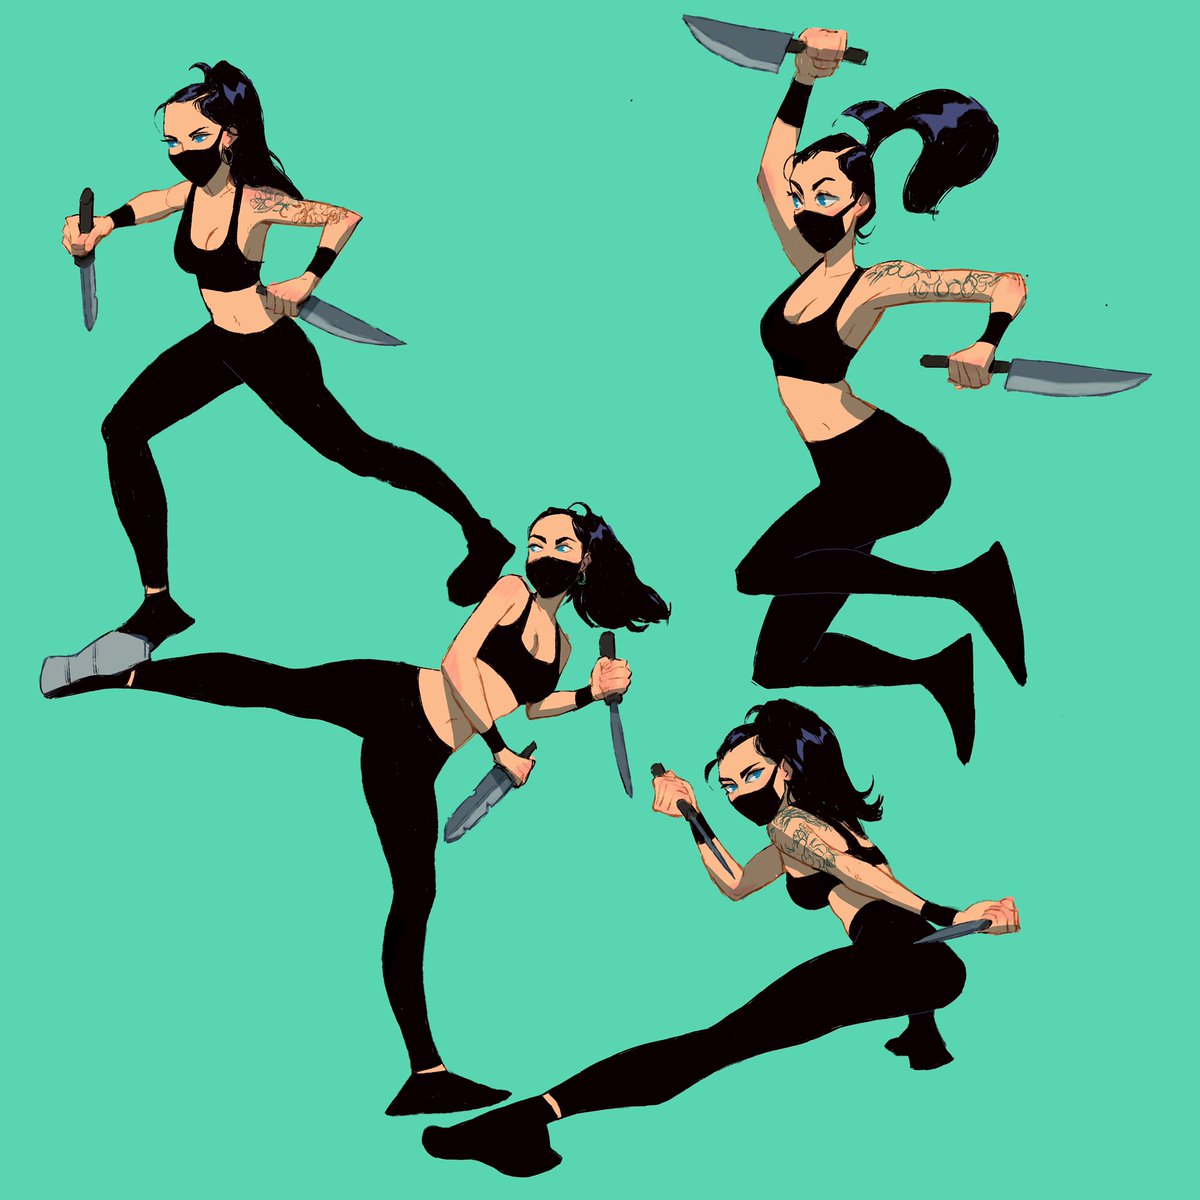 Female Ninja Stock Photo, Picture and Royalty Free Image. Image 59842899.